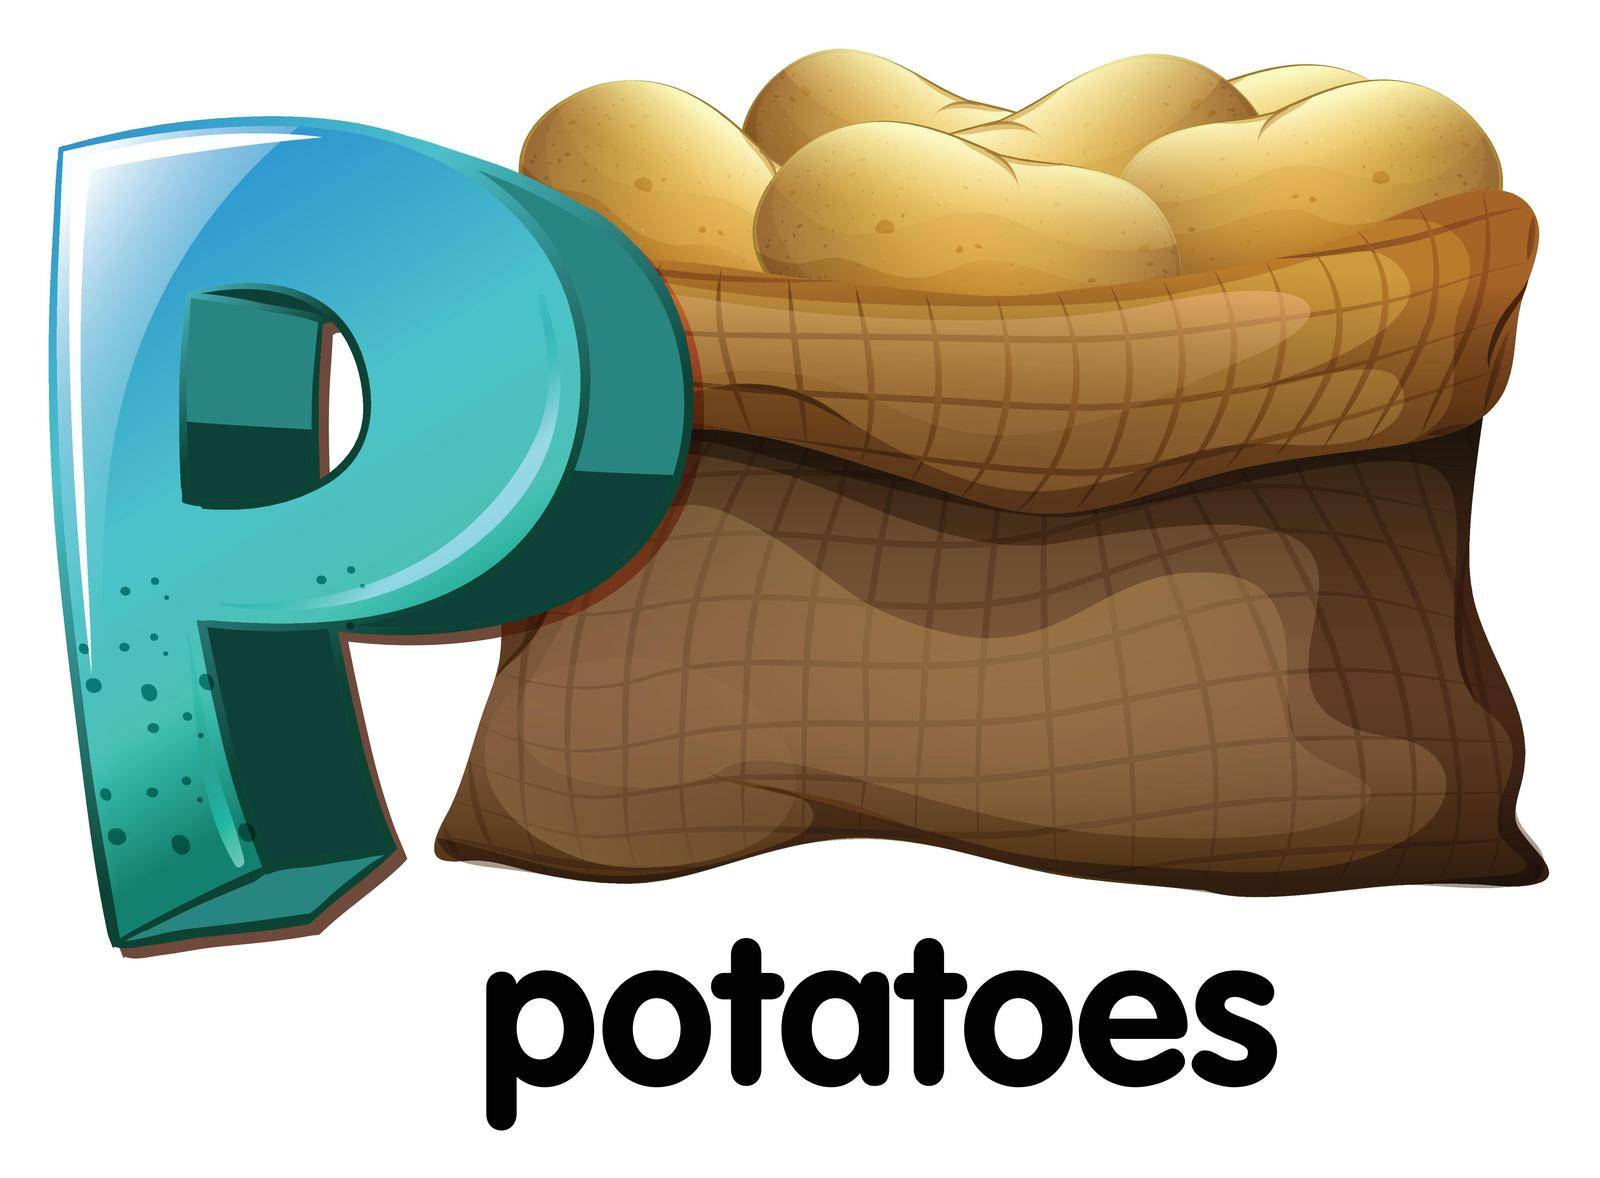 A letter P for potatoes on a white background